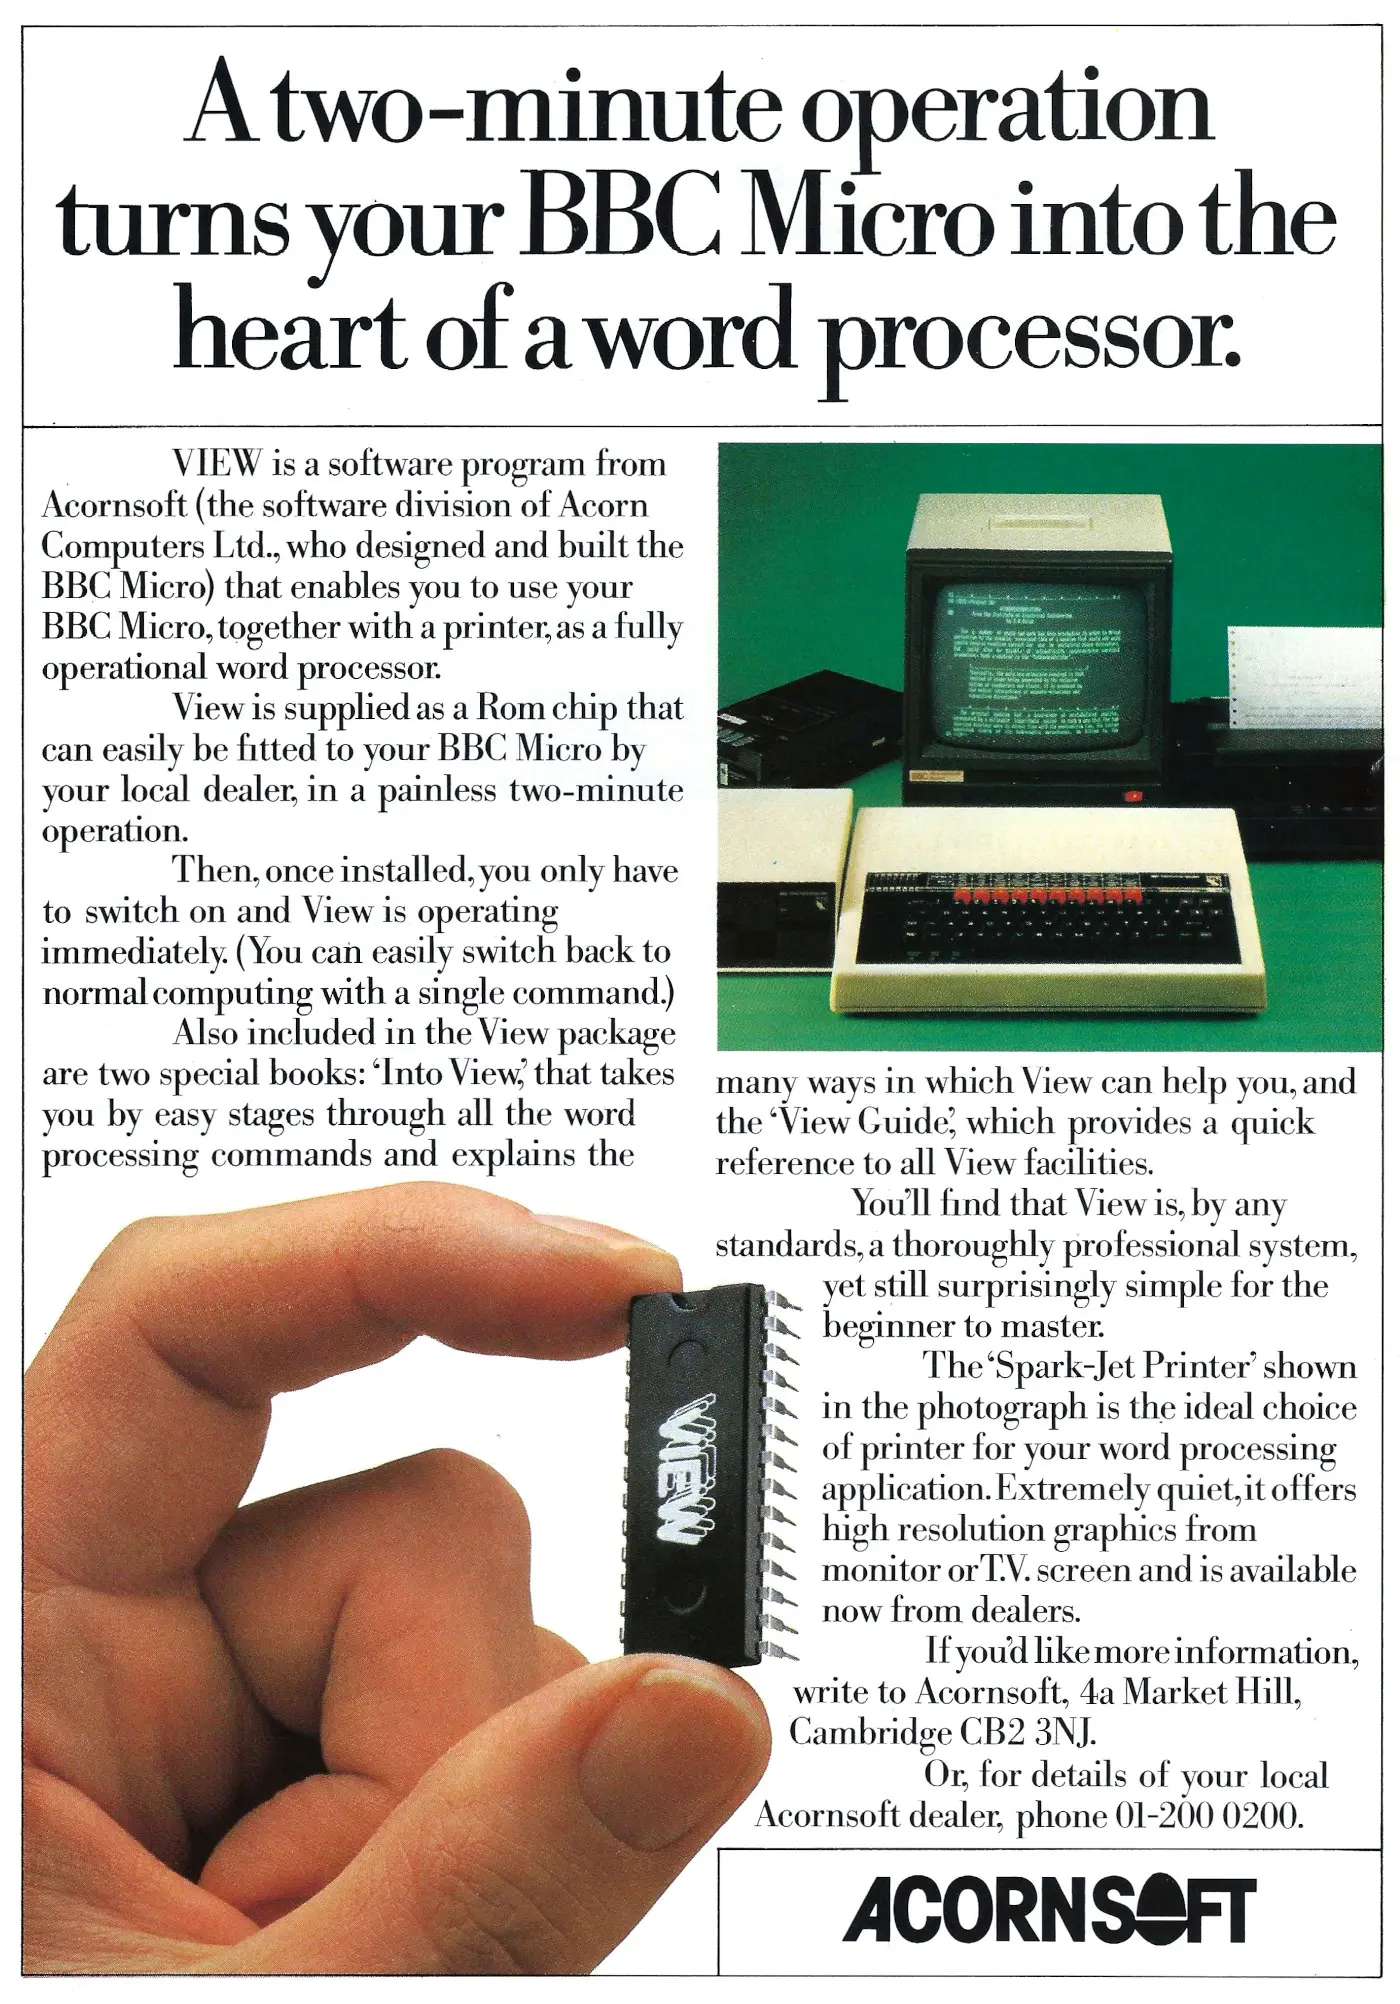 Acorn Advert: A two-minute operation turns your BBC Micro into the heart of a word-processor, from Practical Computing, June 1983